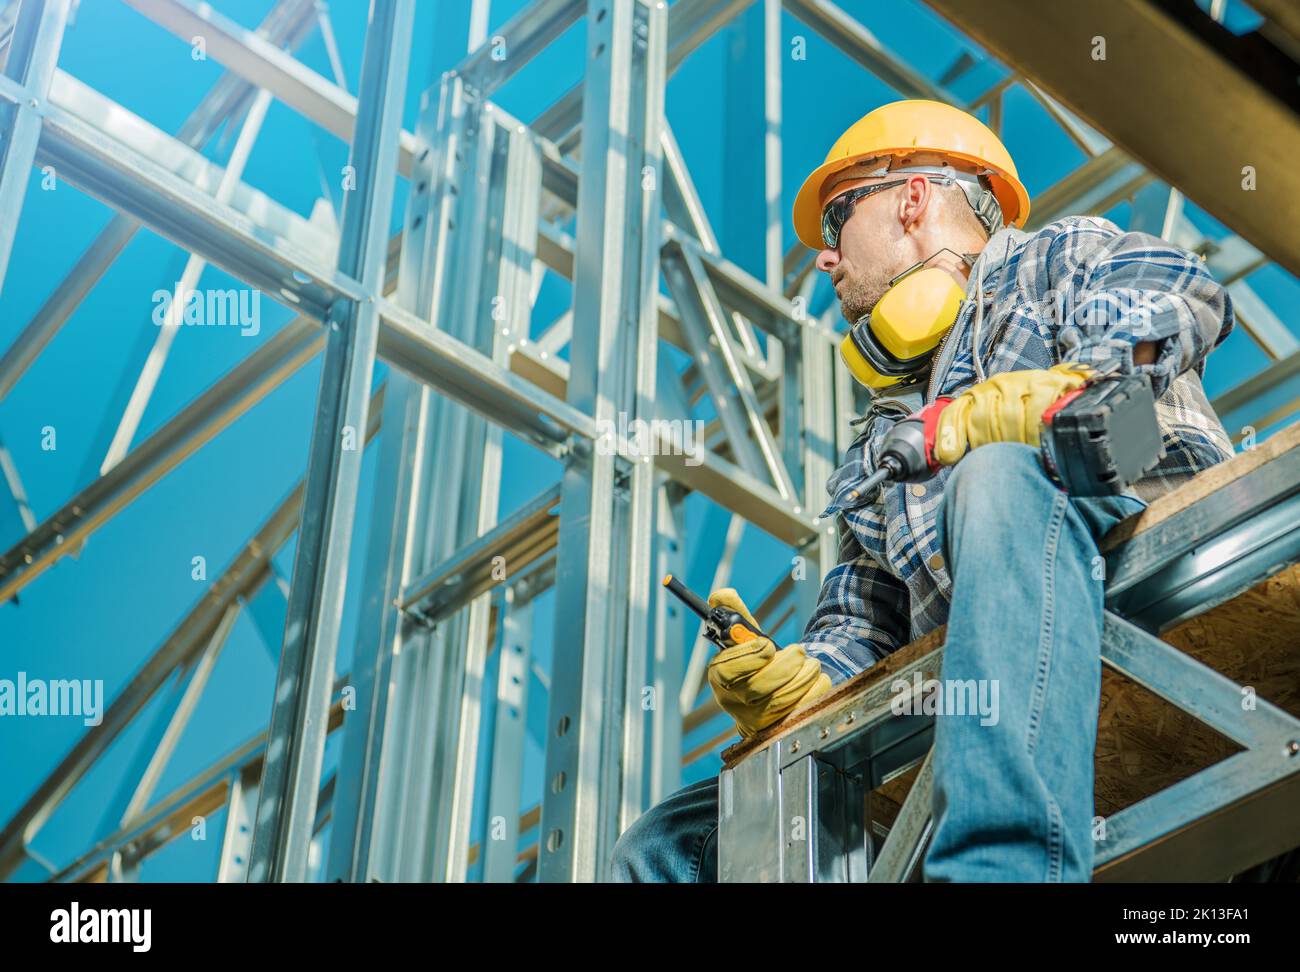 Caucasian Contractor with Walkie-Talkie in One Hand and Electric Screwdriver in the Other Sitting on the Construction Site. Steel House Skeleton Frame Stock Photo